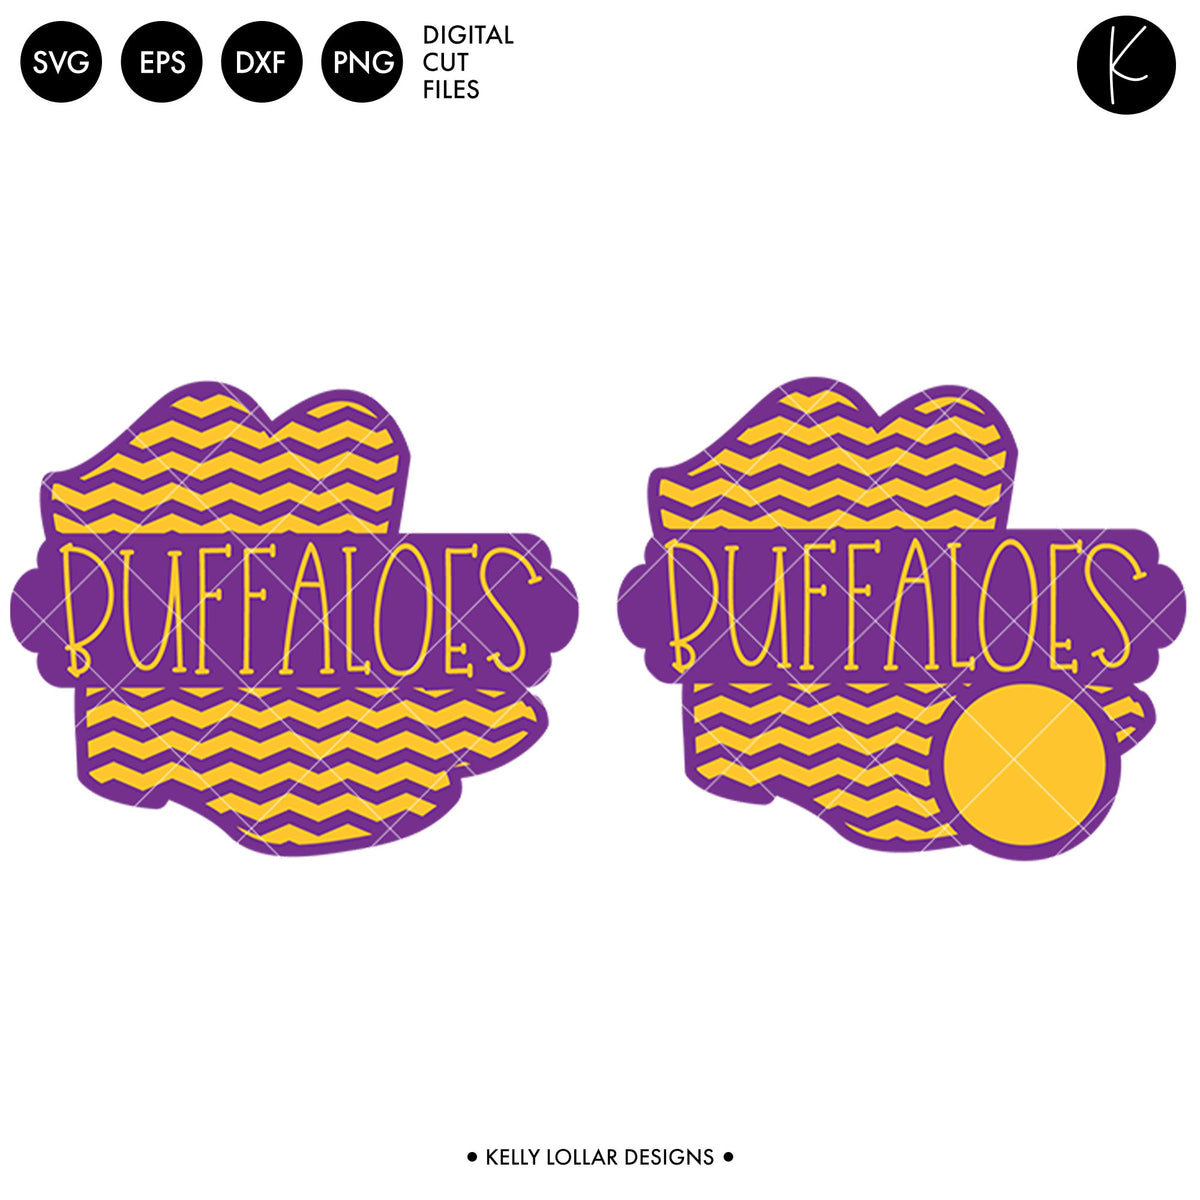 Buffaloes Drill Bundle | SVG DXF EPS PNG Cut Files